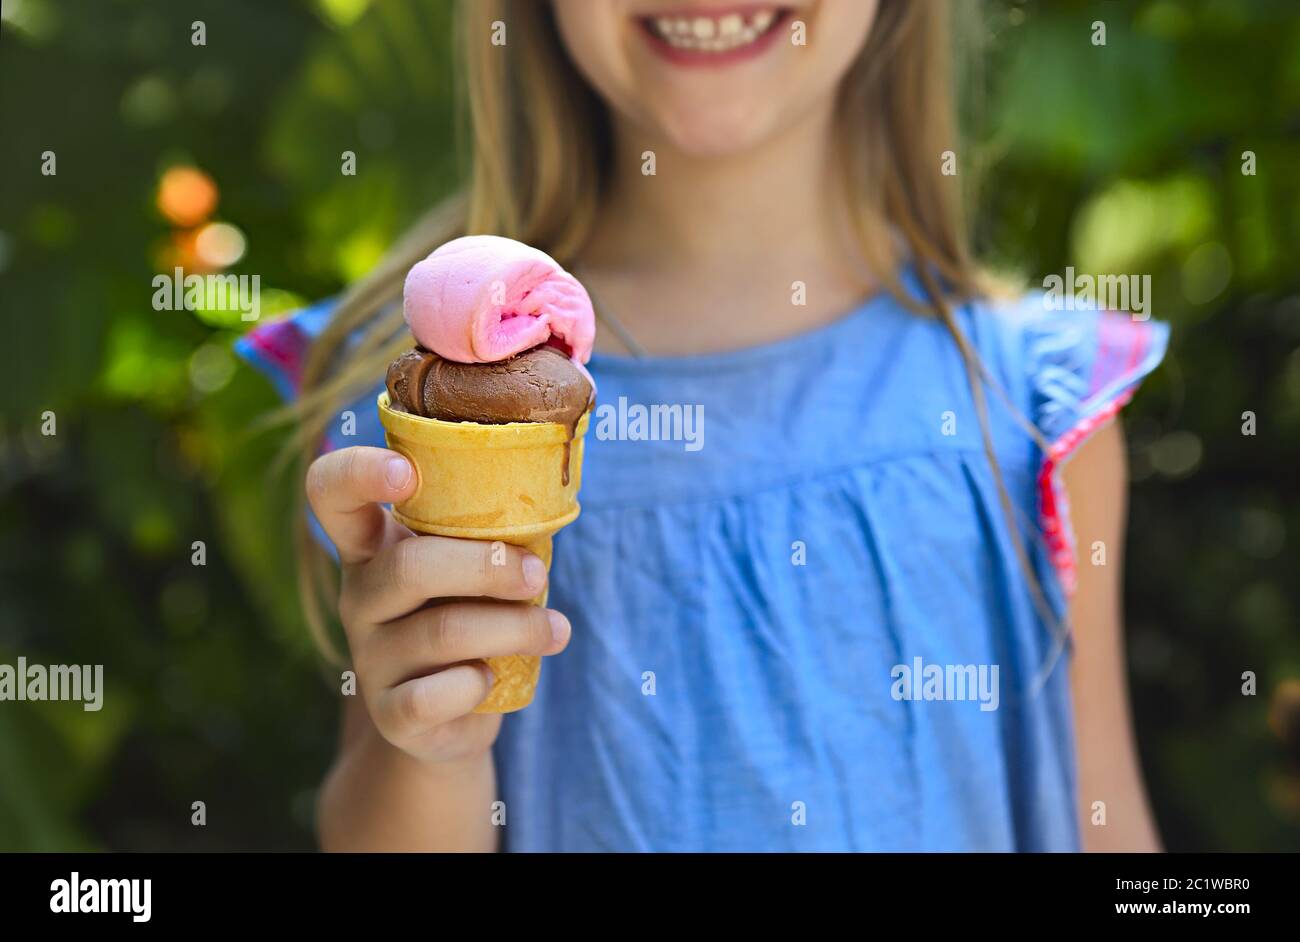 Cute little girl with funny expression holding ice cream cone outside against bright nature background Stock Photo